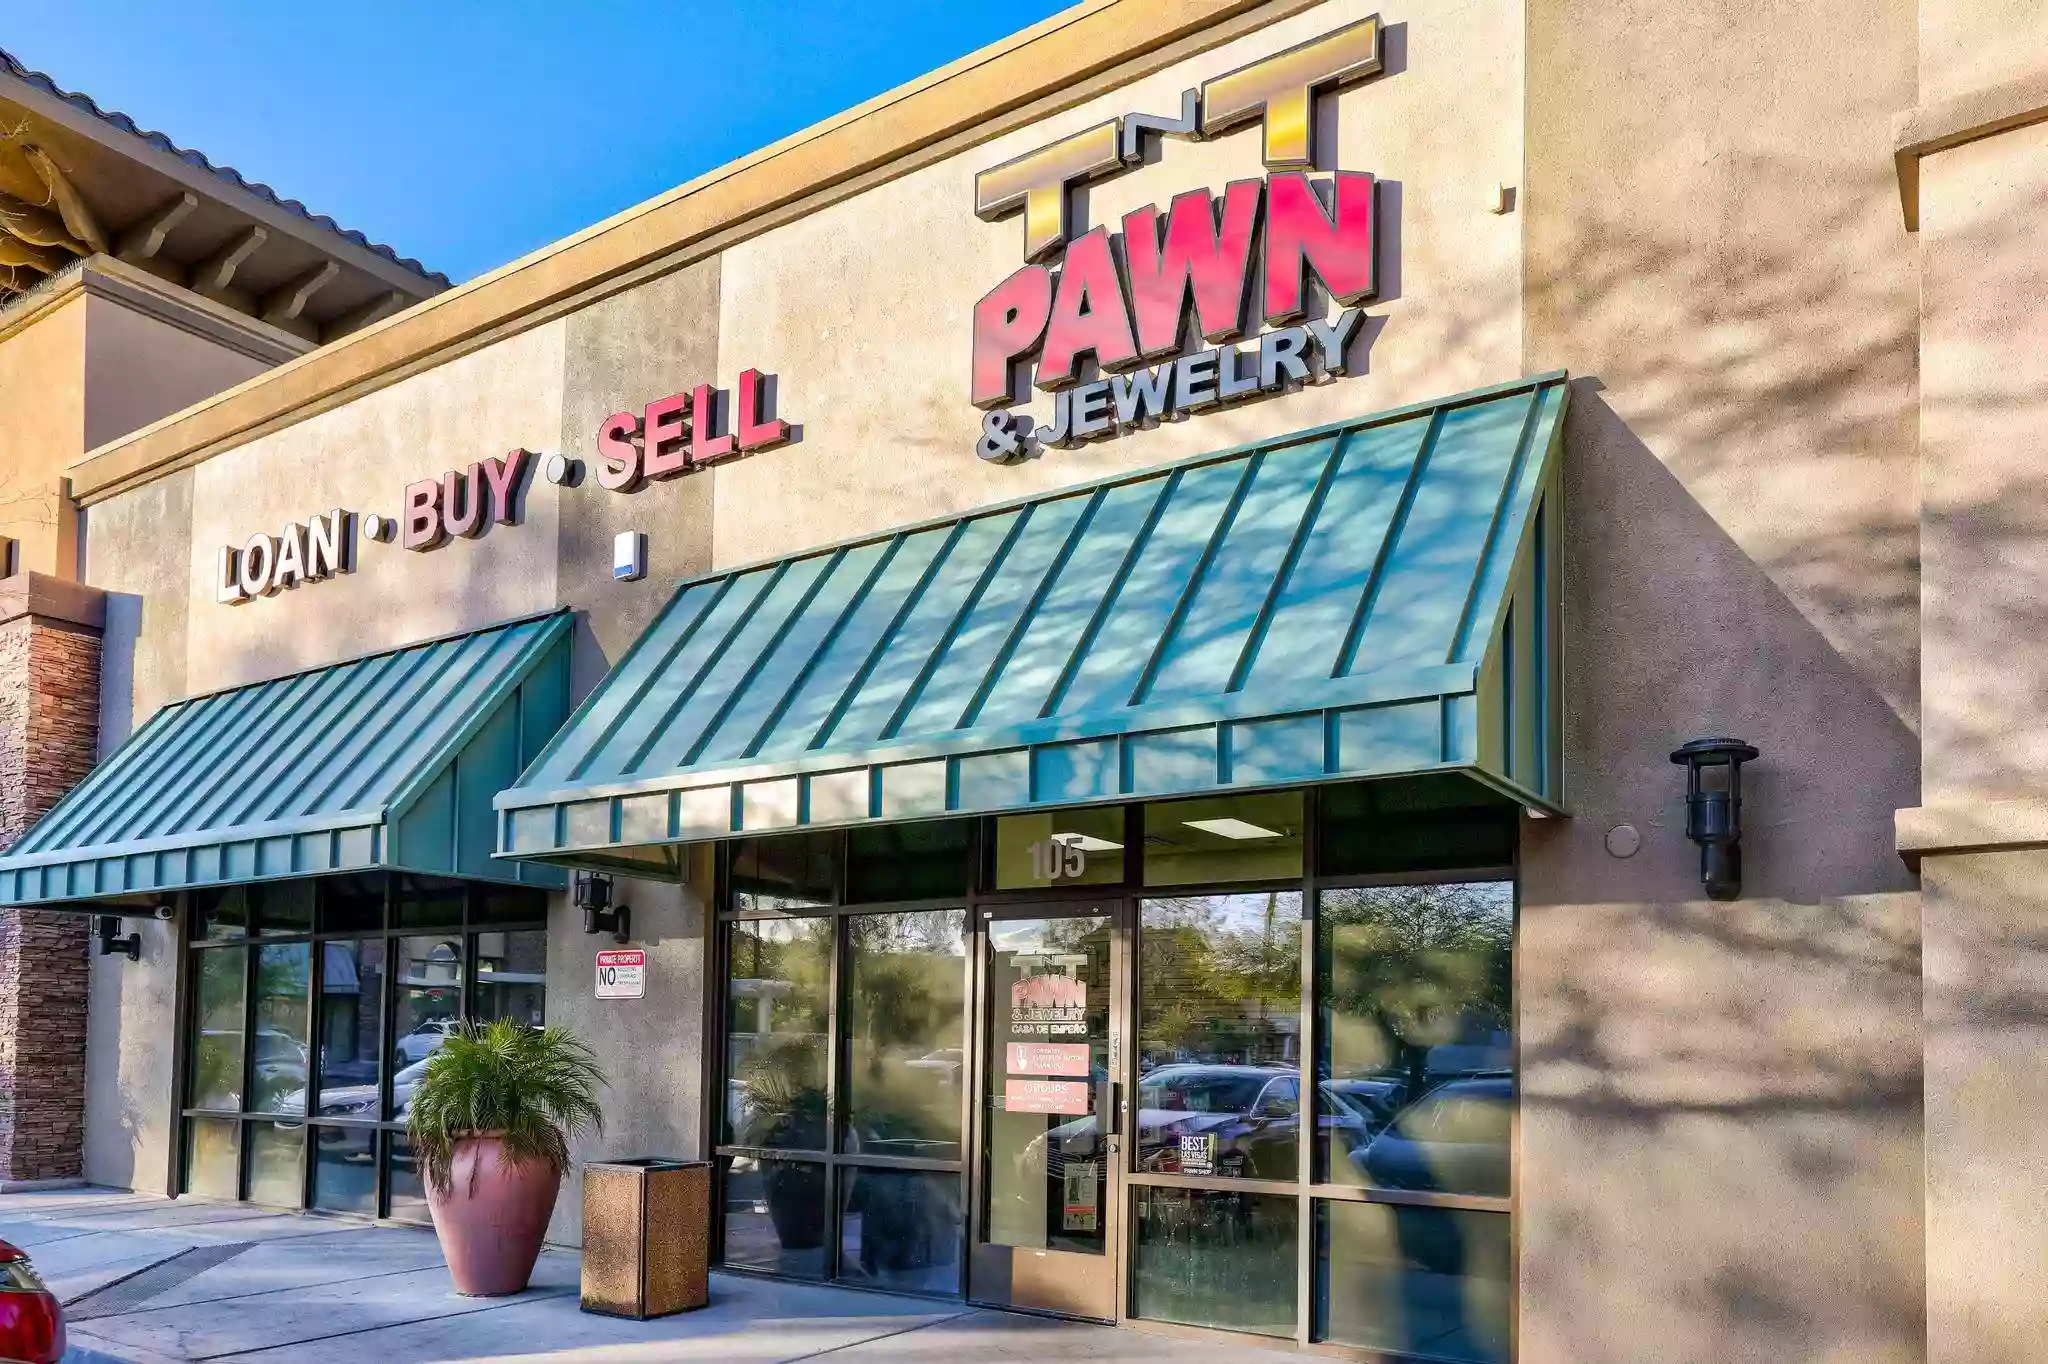 TNT Pawn and Jewelry